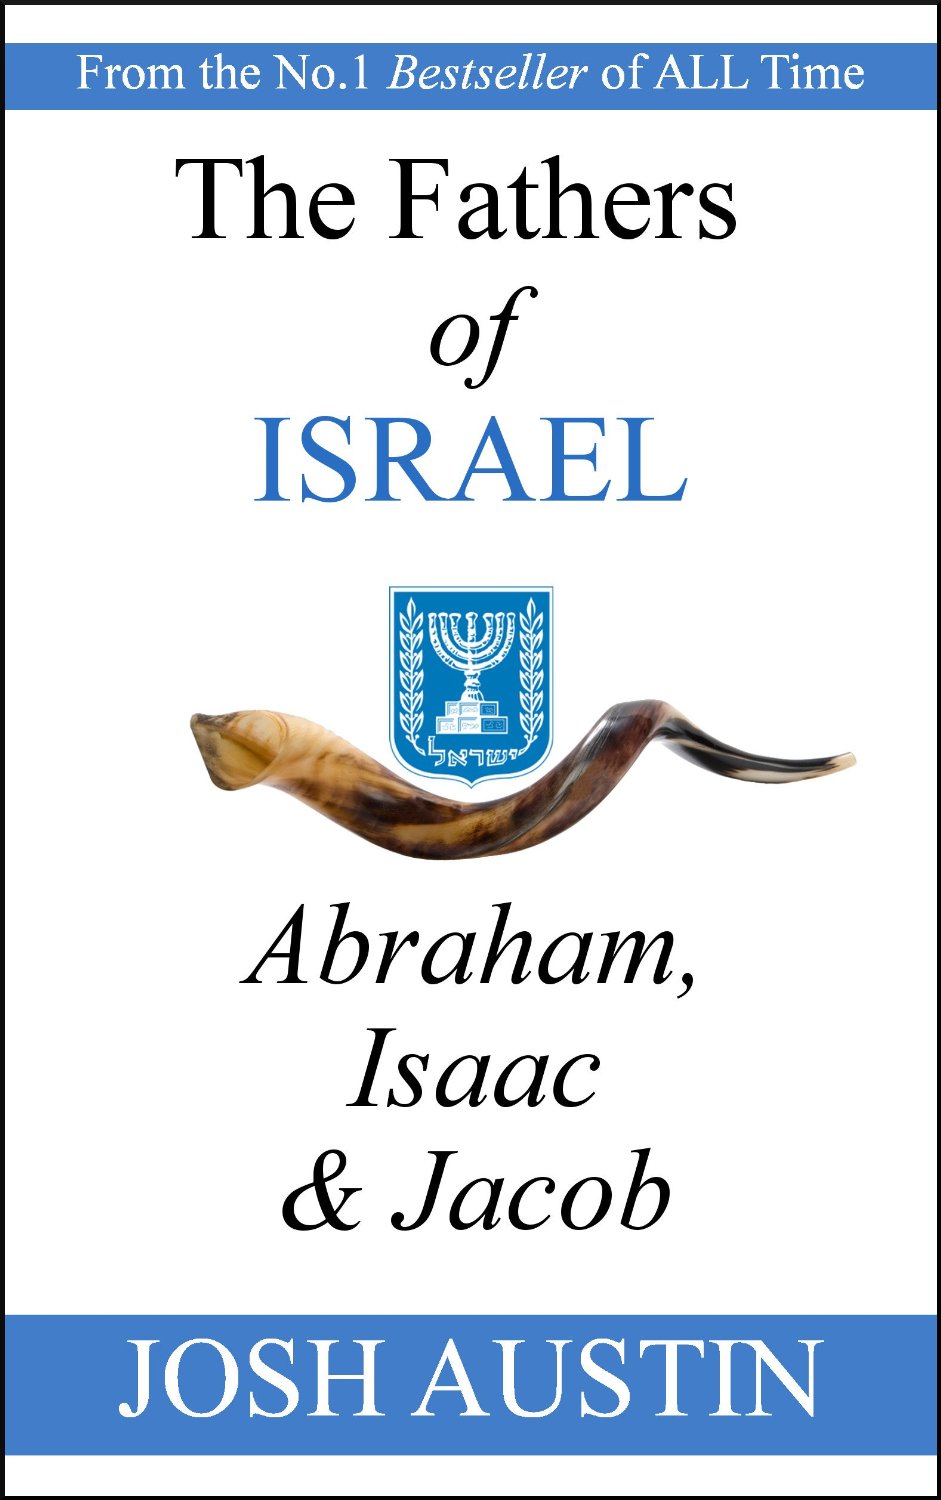 The Fathers of Israel: Abraham, Isaac & Jacob by Josh Austin